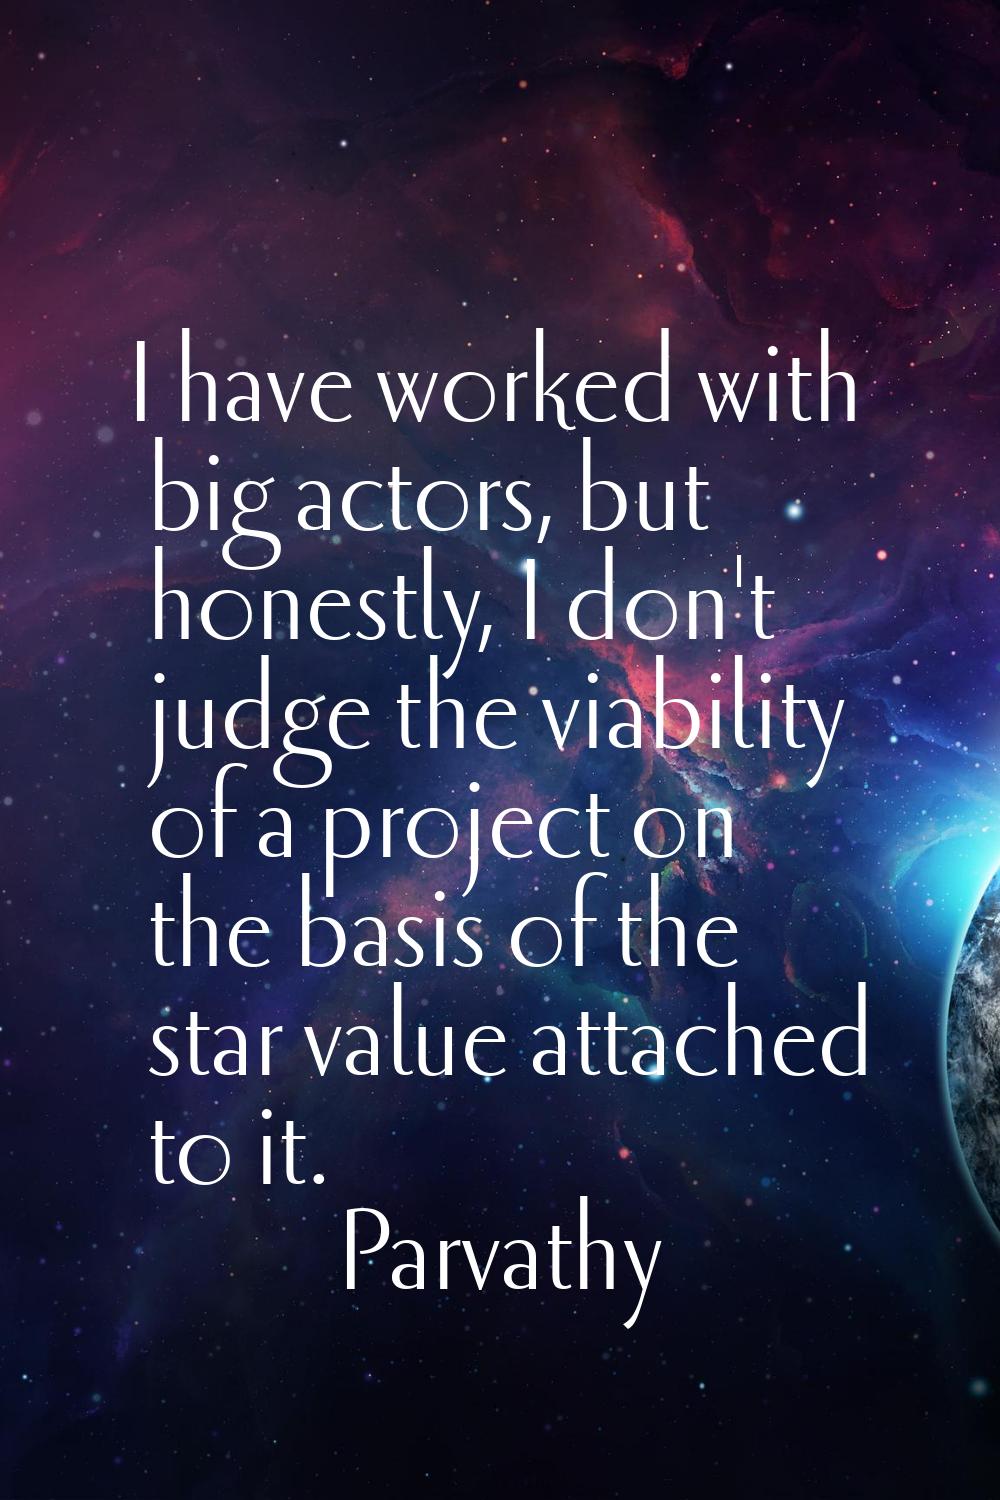 I have worked with big actors, but honestly, I don't judge the viability of a project on the basis 